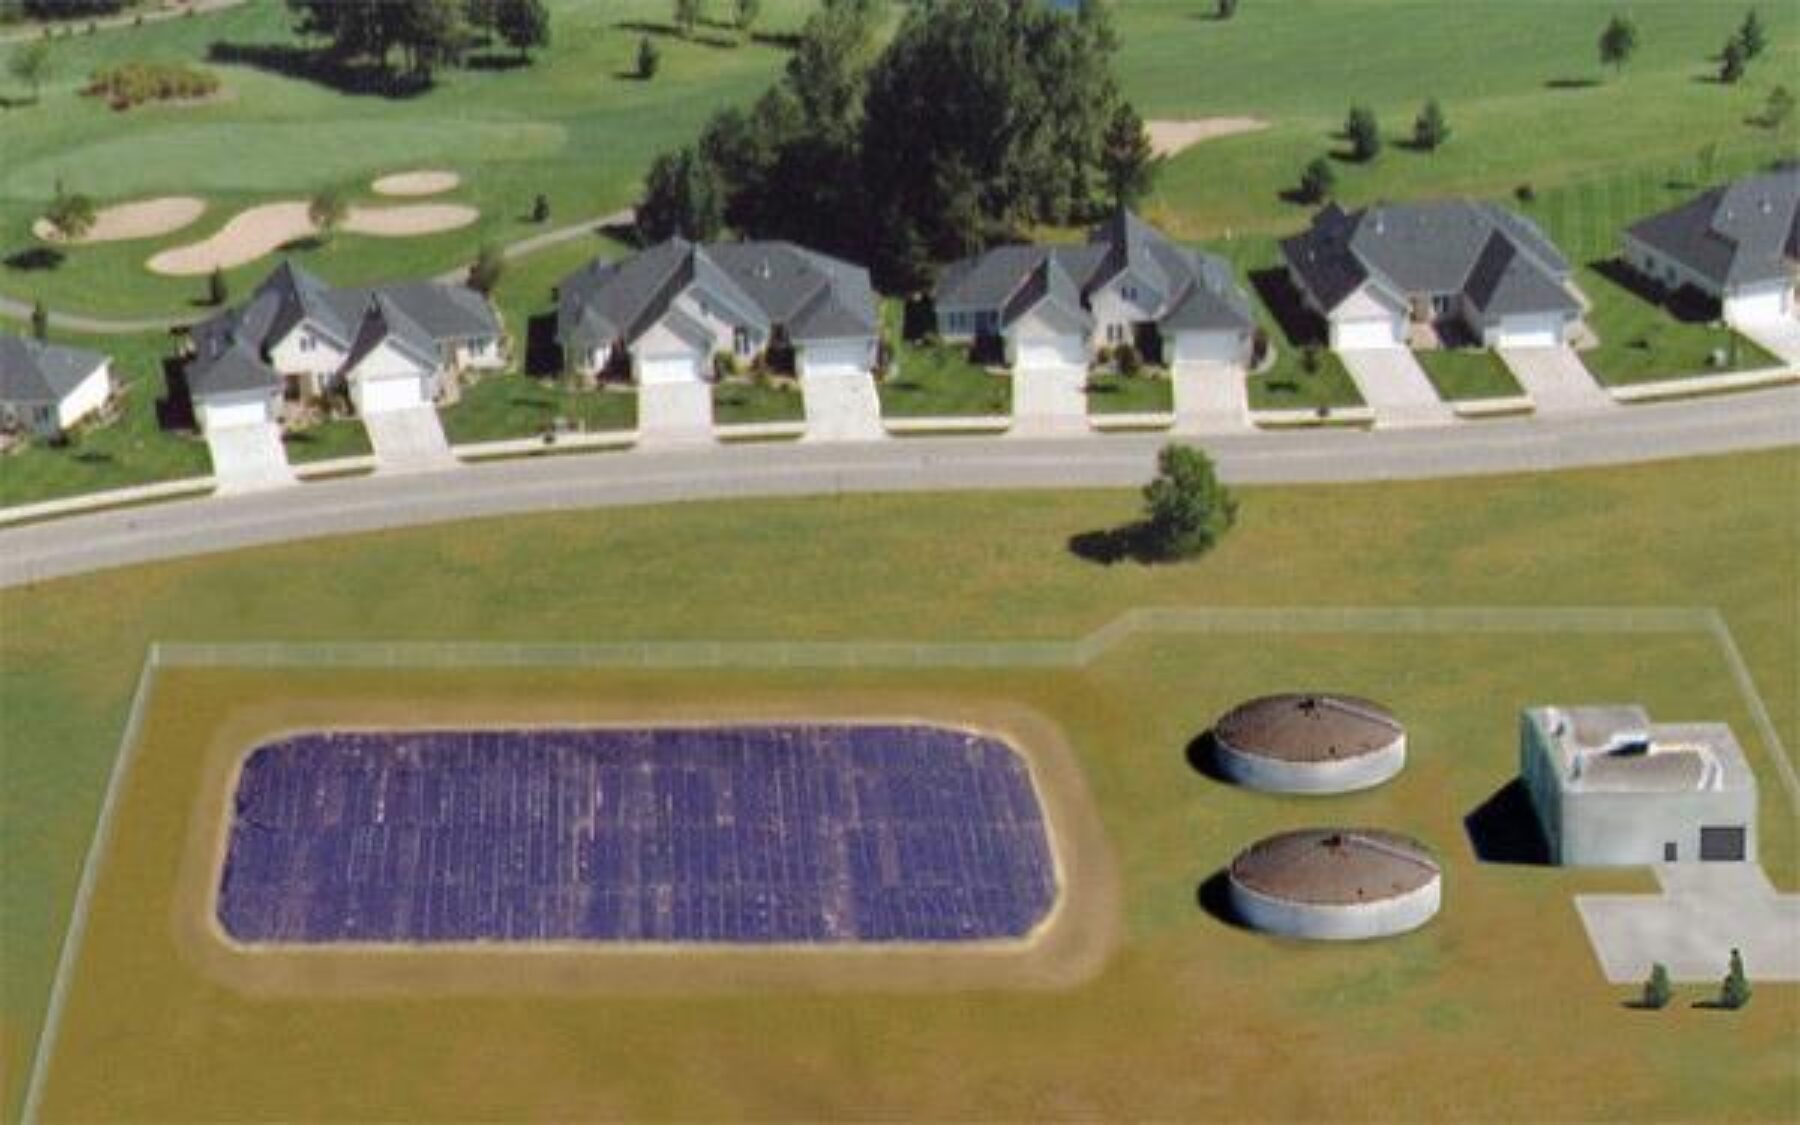 Aerial view of water treatment facility